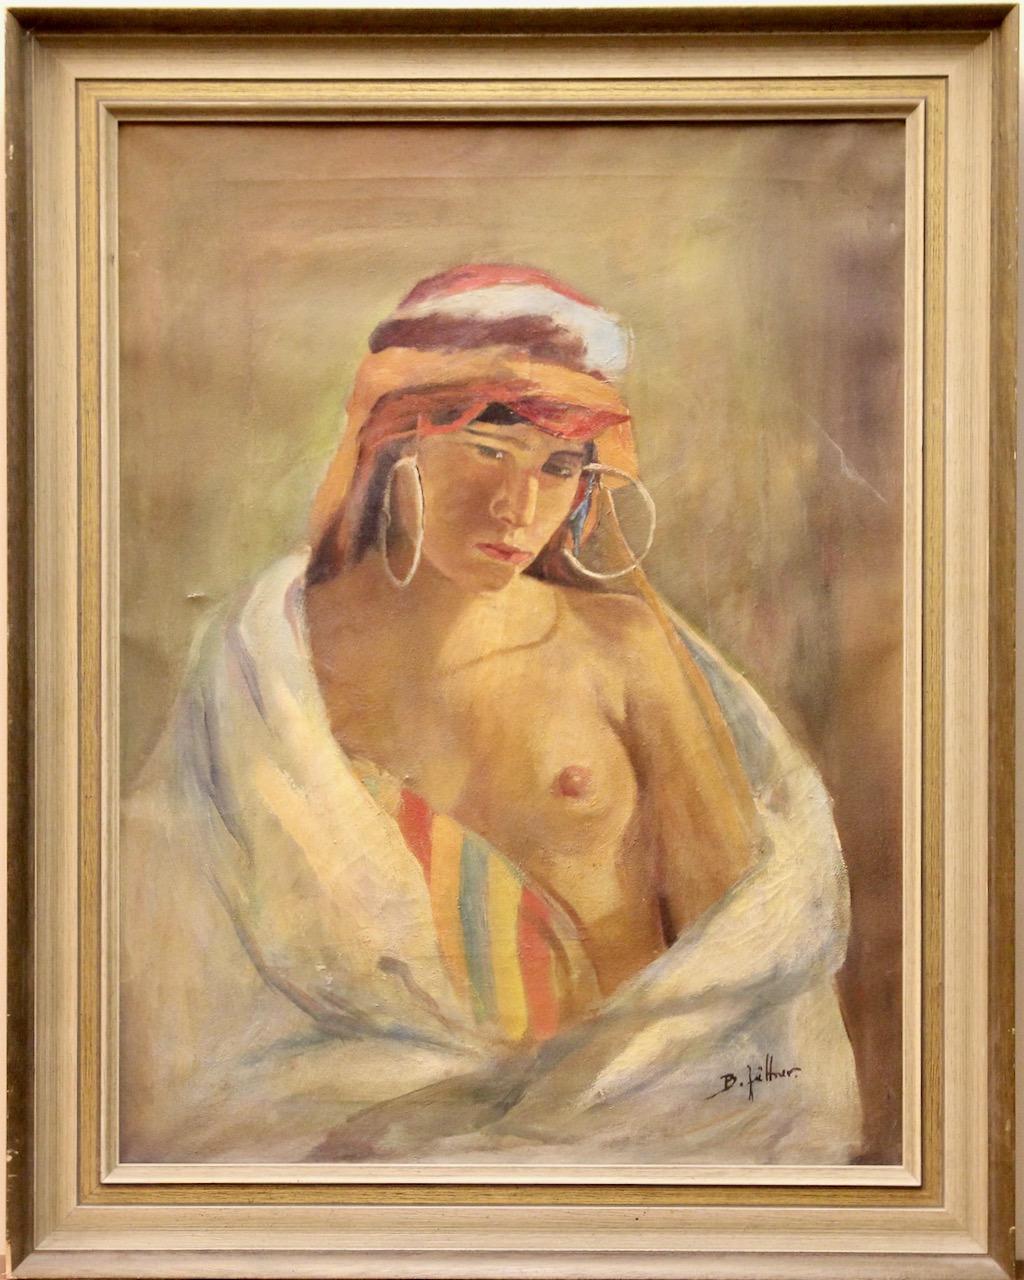 Antique oil painting, Bruno Jüttner, nude of a North African young lady

Rare half-nude by the well-known German painter. 

Age-related condition. A pressure mark in the center left. Frame slightly damaged.
Dimensions without frame: 50 cm x 66